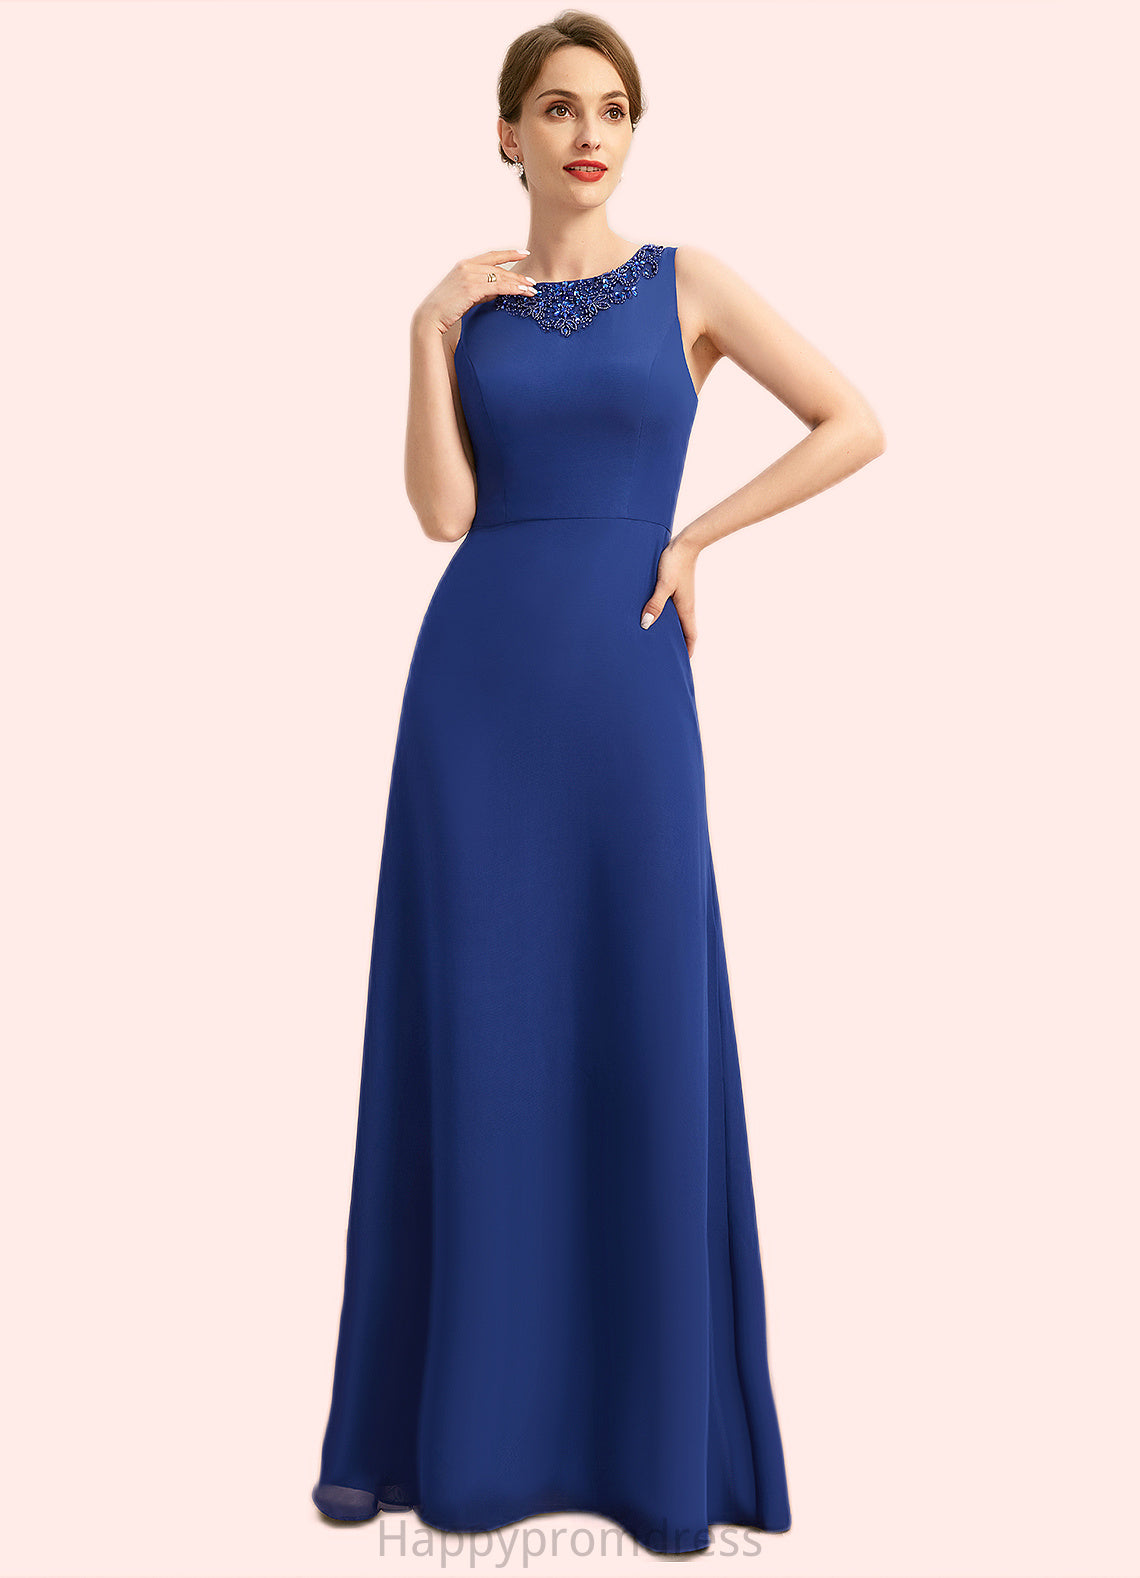 Nora A-line Scoop Floor-Length Chiffon Mother of the Bride Dress With Beading Sequins XXSP0021920